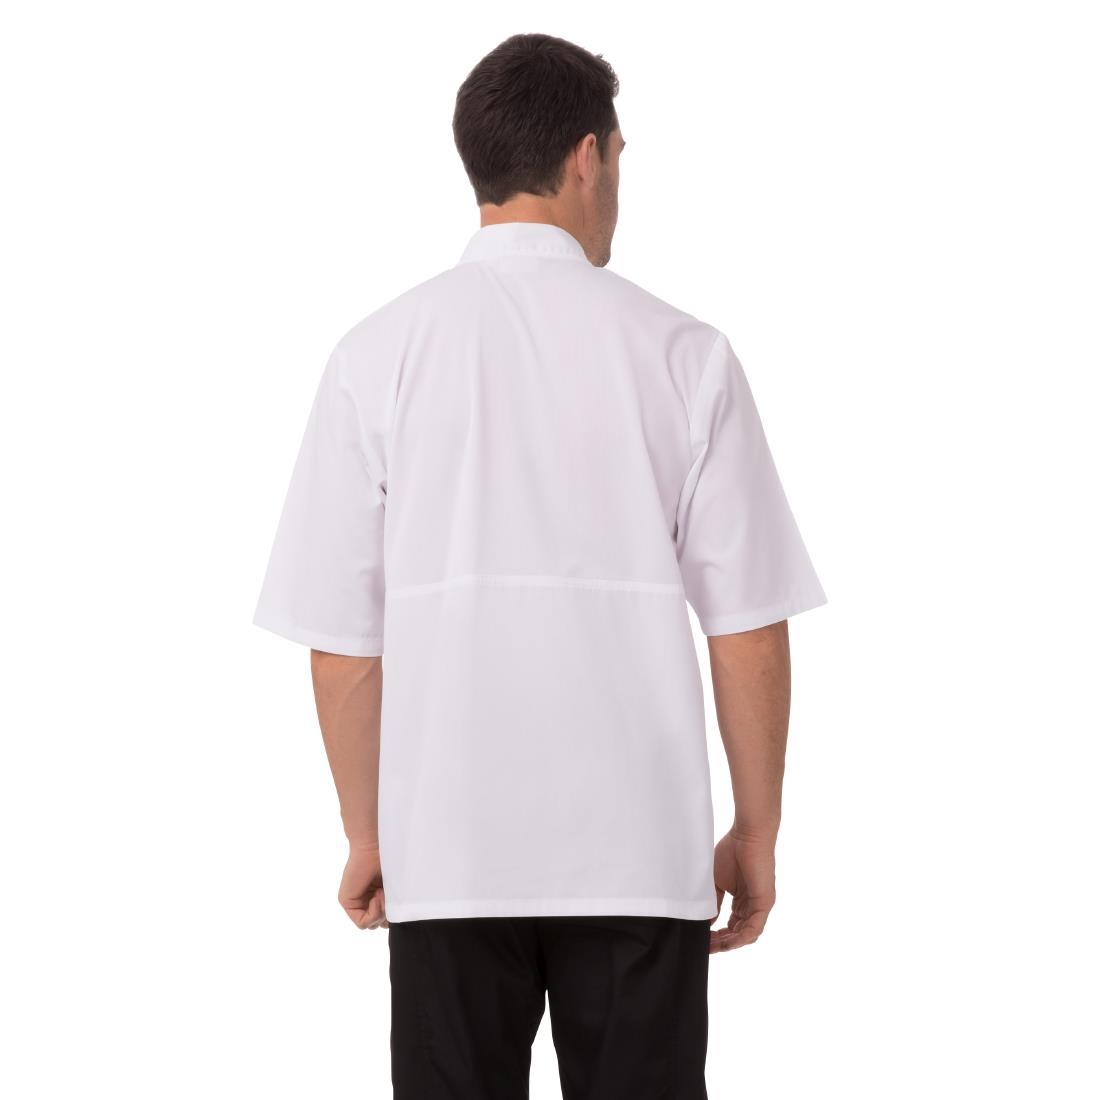 Chefs Works Montreal Cool Vent Unisex Short Sleeve Chefs Jacket White 4XL - A914-4XL  - 3